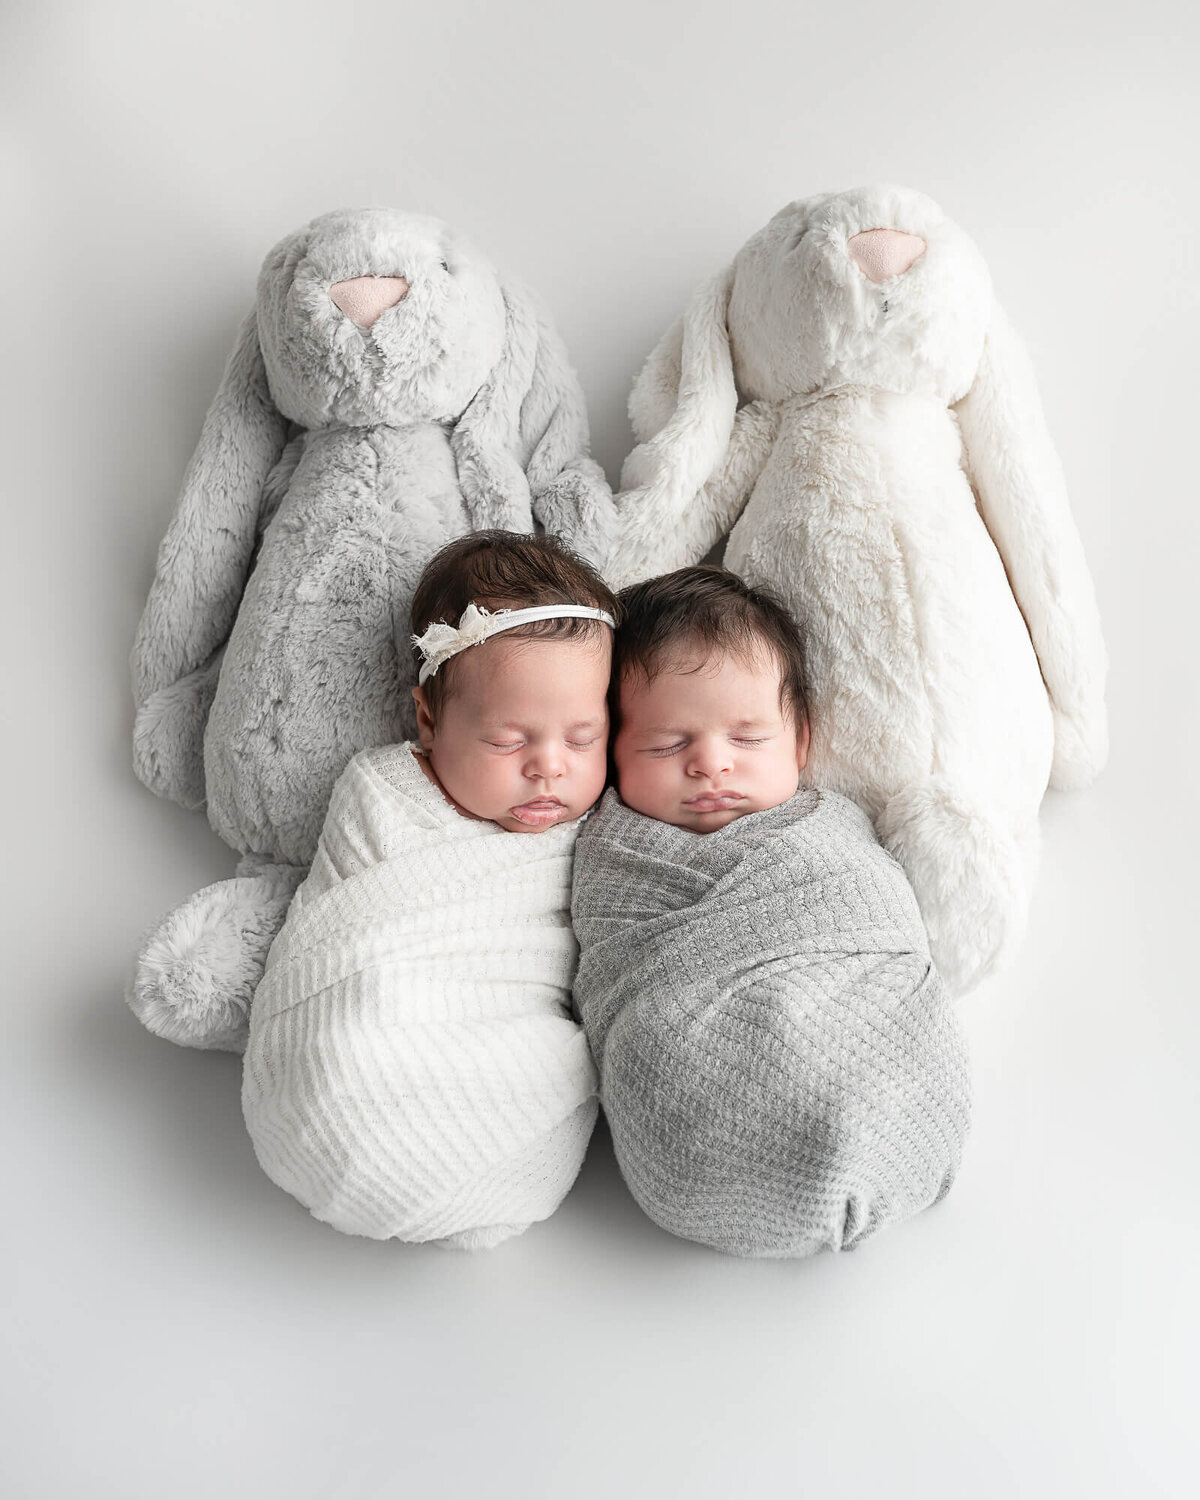 swaddled twin babies with stuffed animals